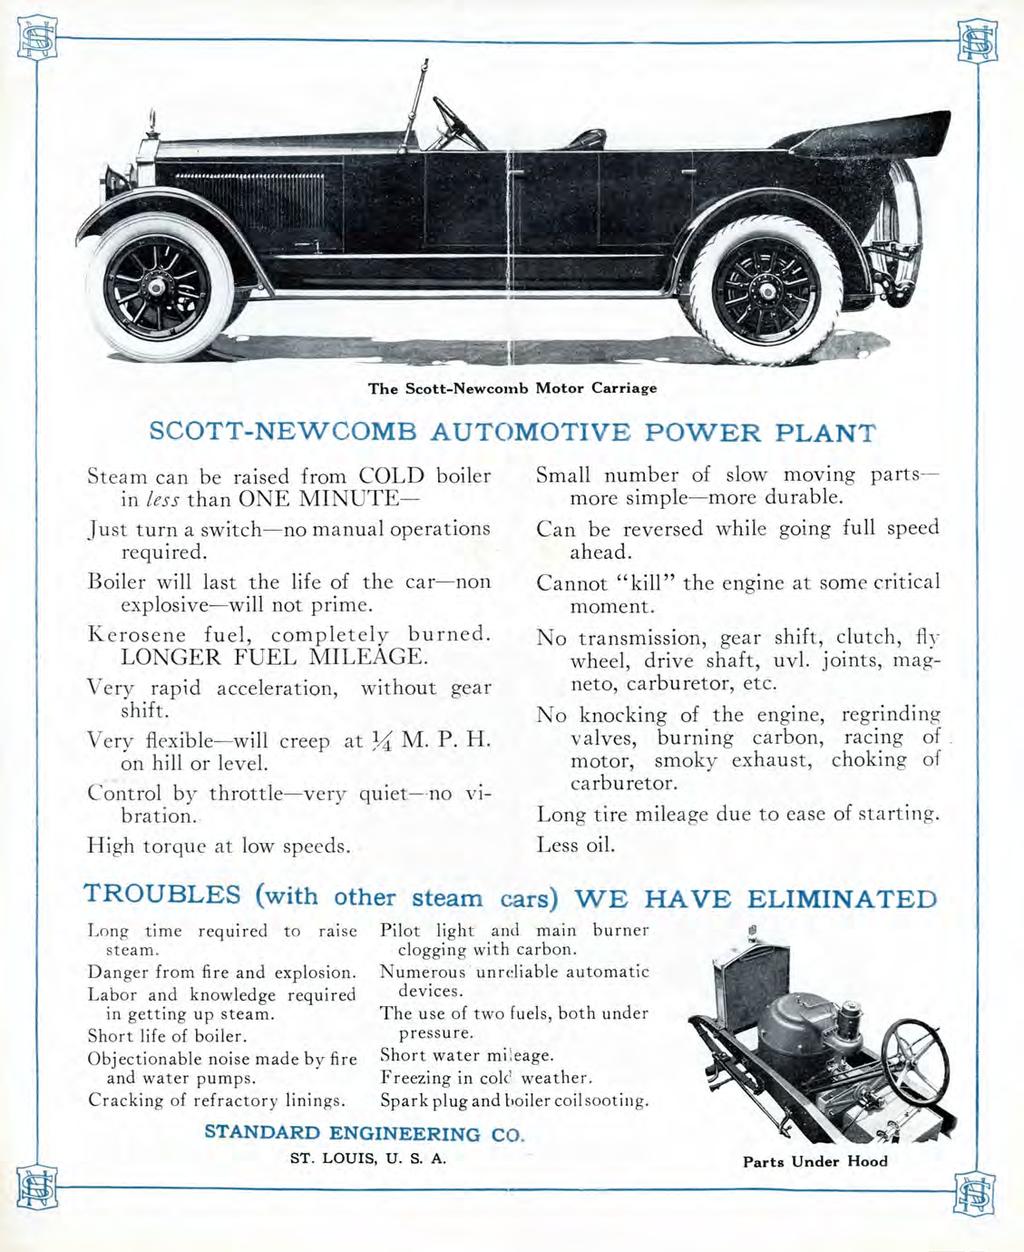 ft The Scott-Newcomb Motor Carriage SCOTT-NEWCOMB AUTOMOTIVE POWER PLANT Steam can be raised from COLD boiler in less than ONE MINUTE- Just turn a switch no manual operations required.